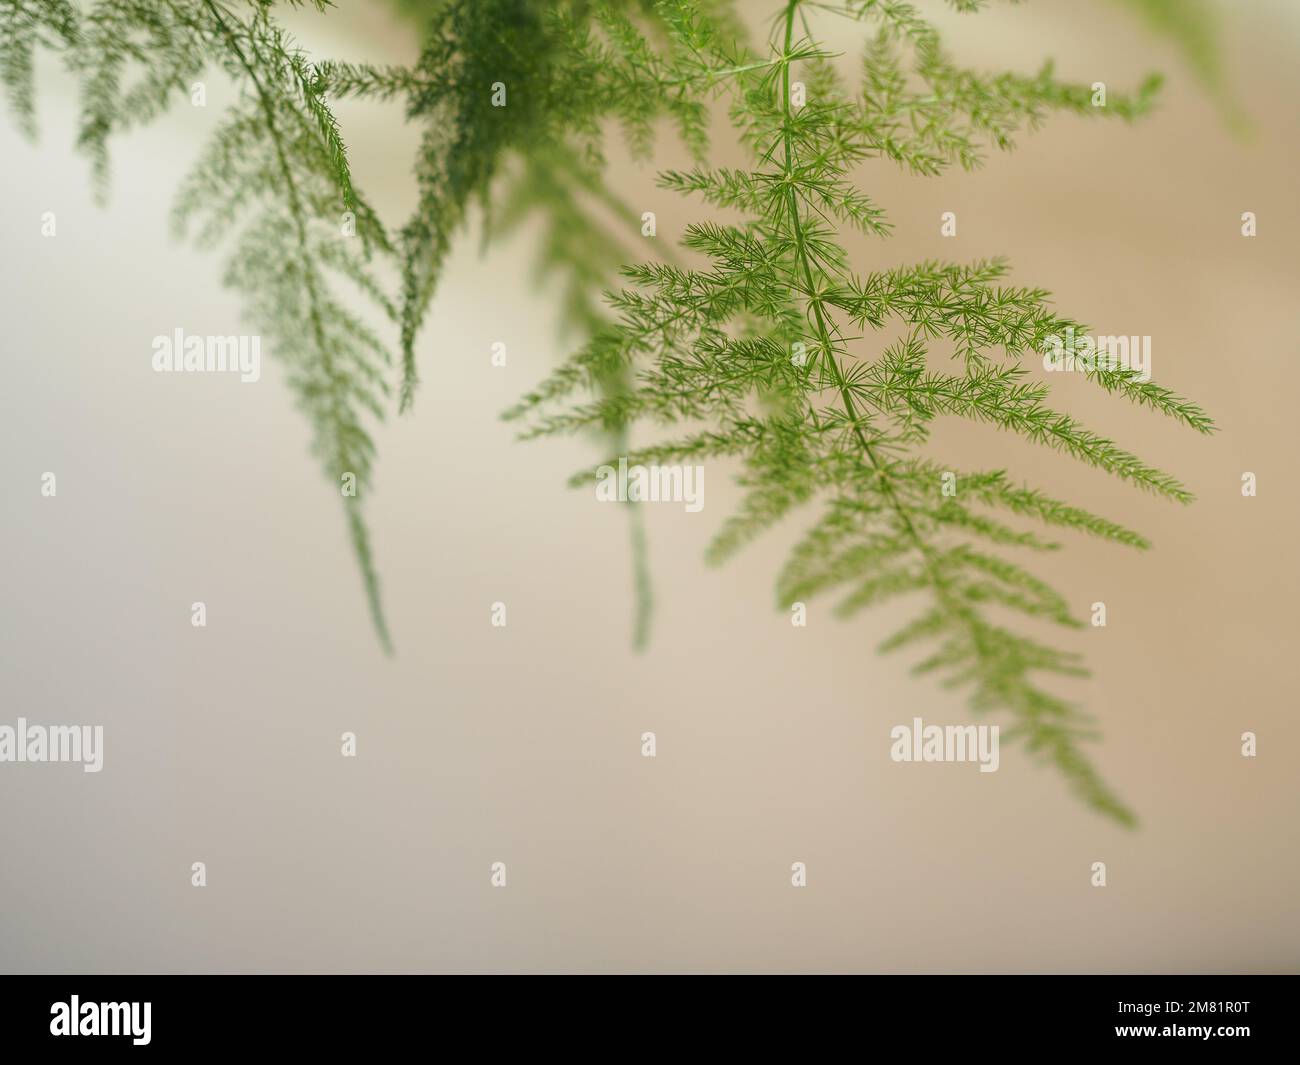 Close up of the fronds of an asparagus fern (Asparagus setaceus) coming down from the top of the picture against a plain background Stock Photo